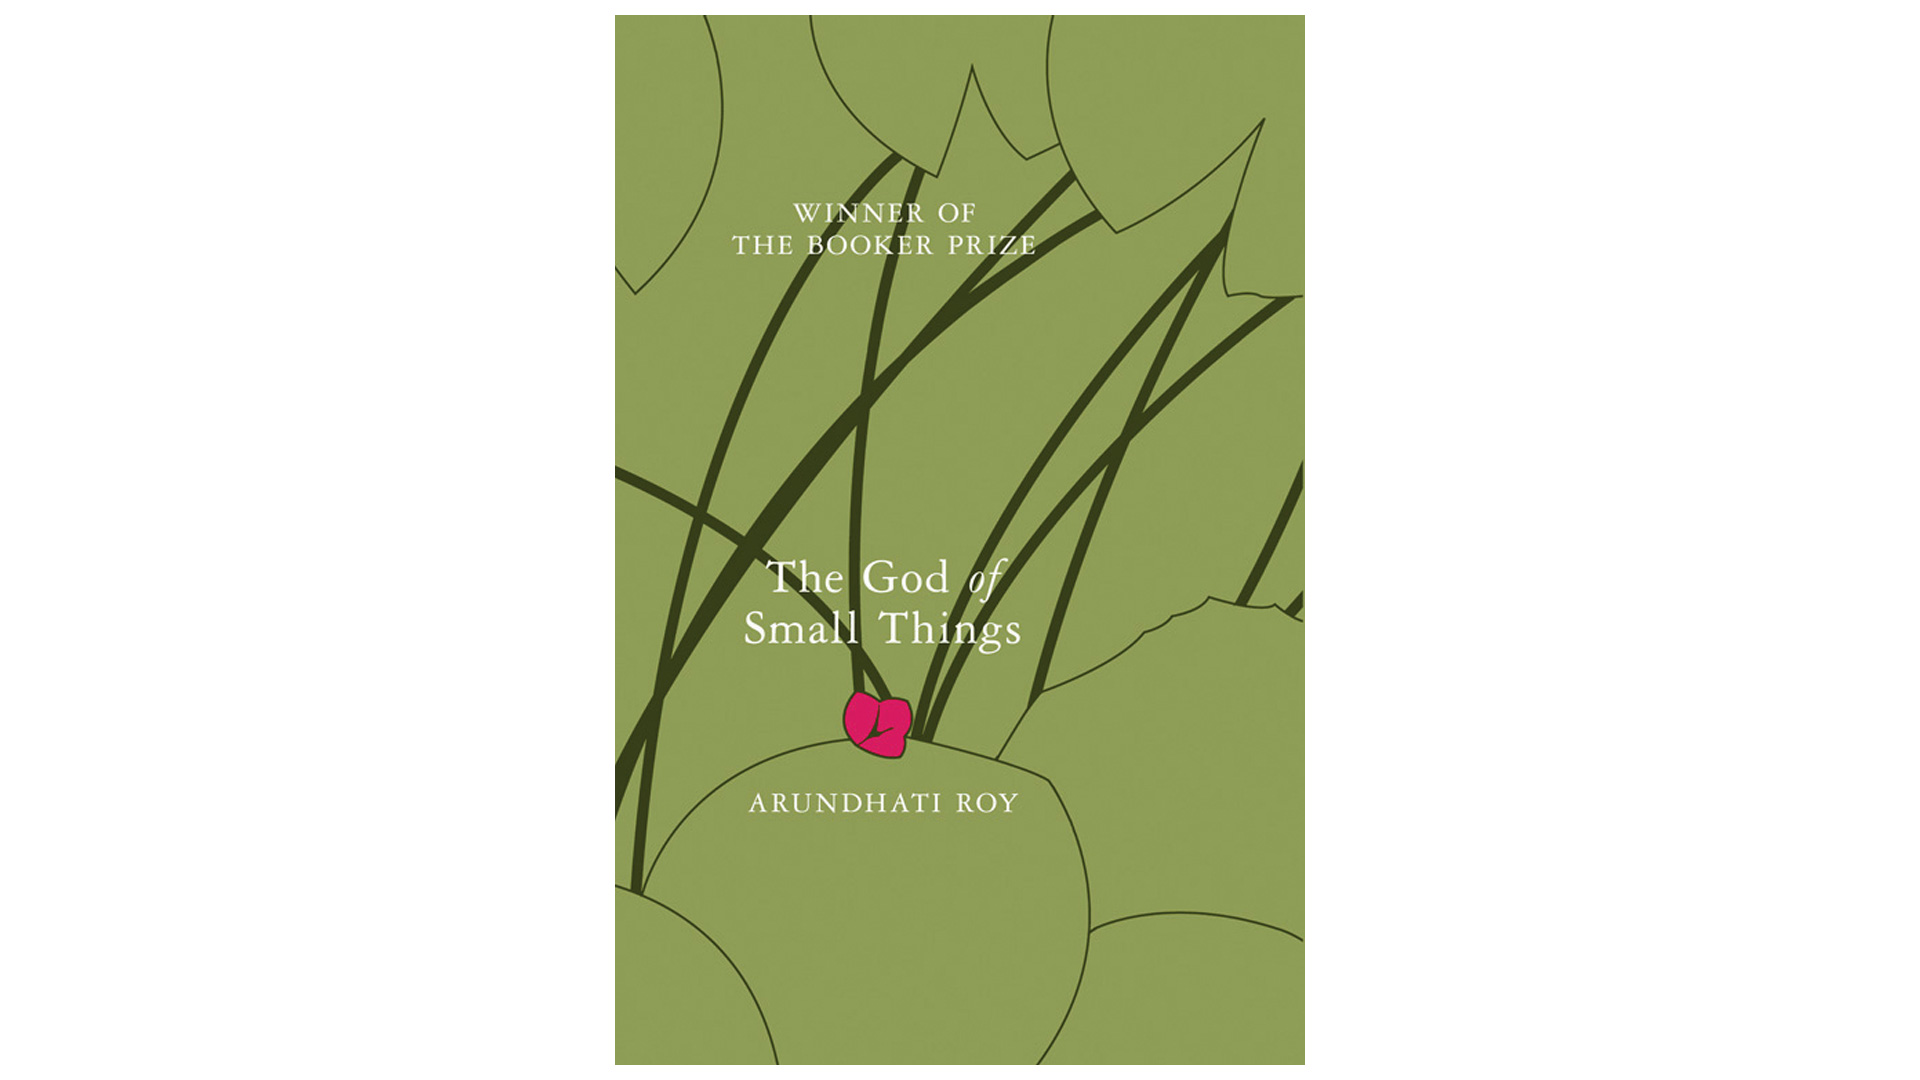 The God of Small Things by Arundhati Roy 